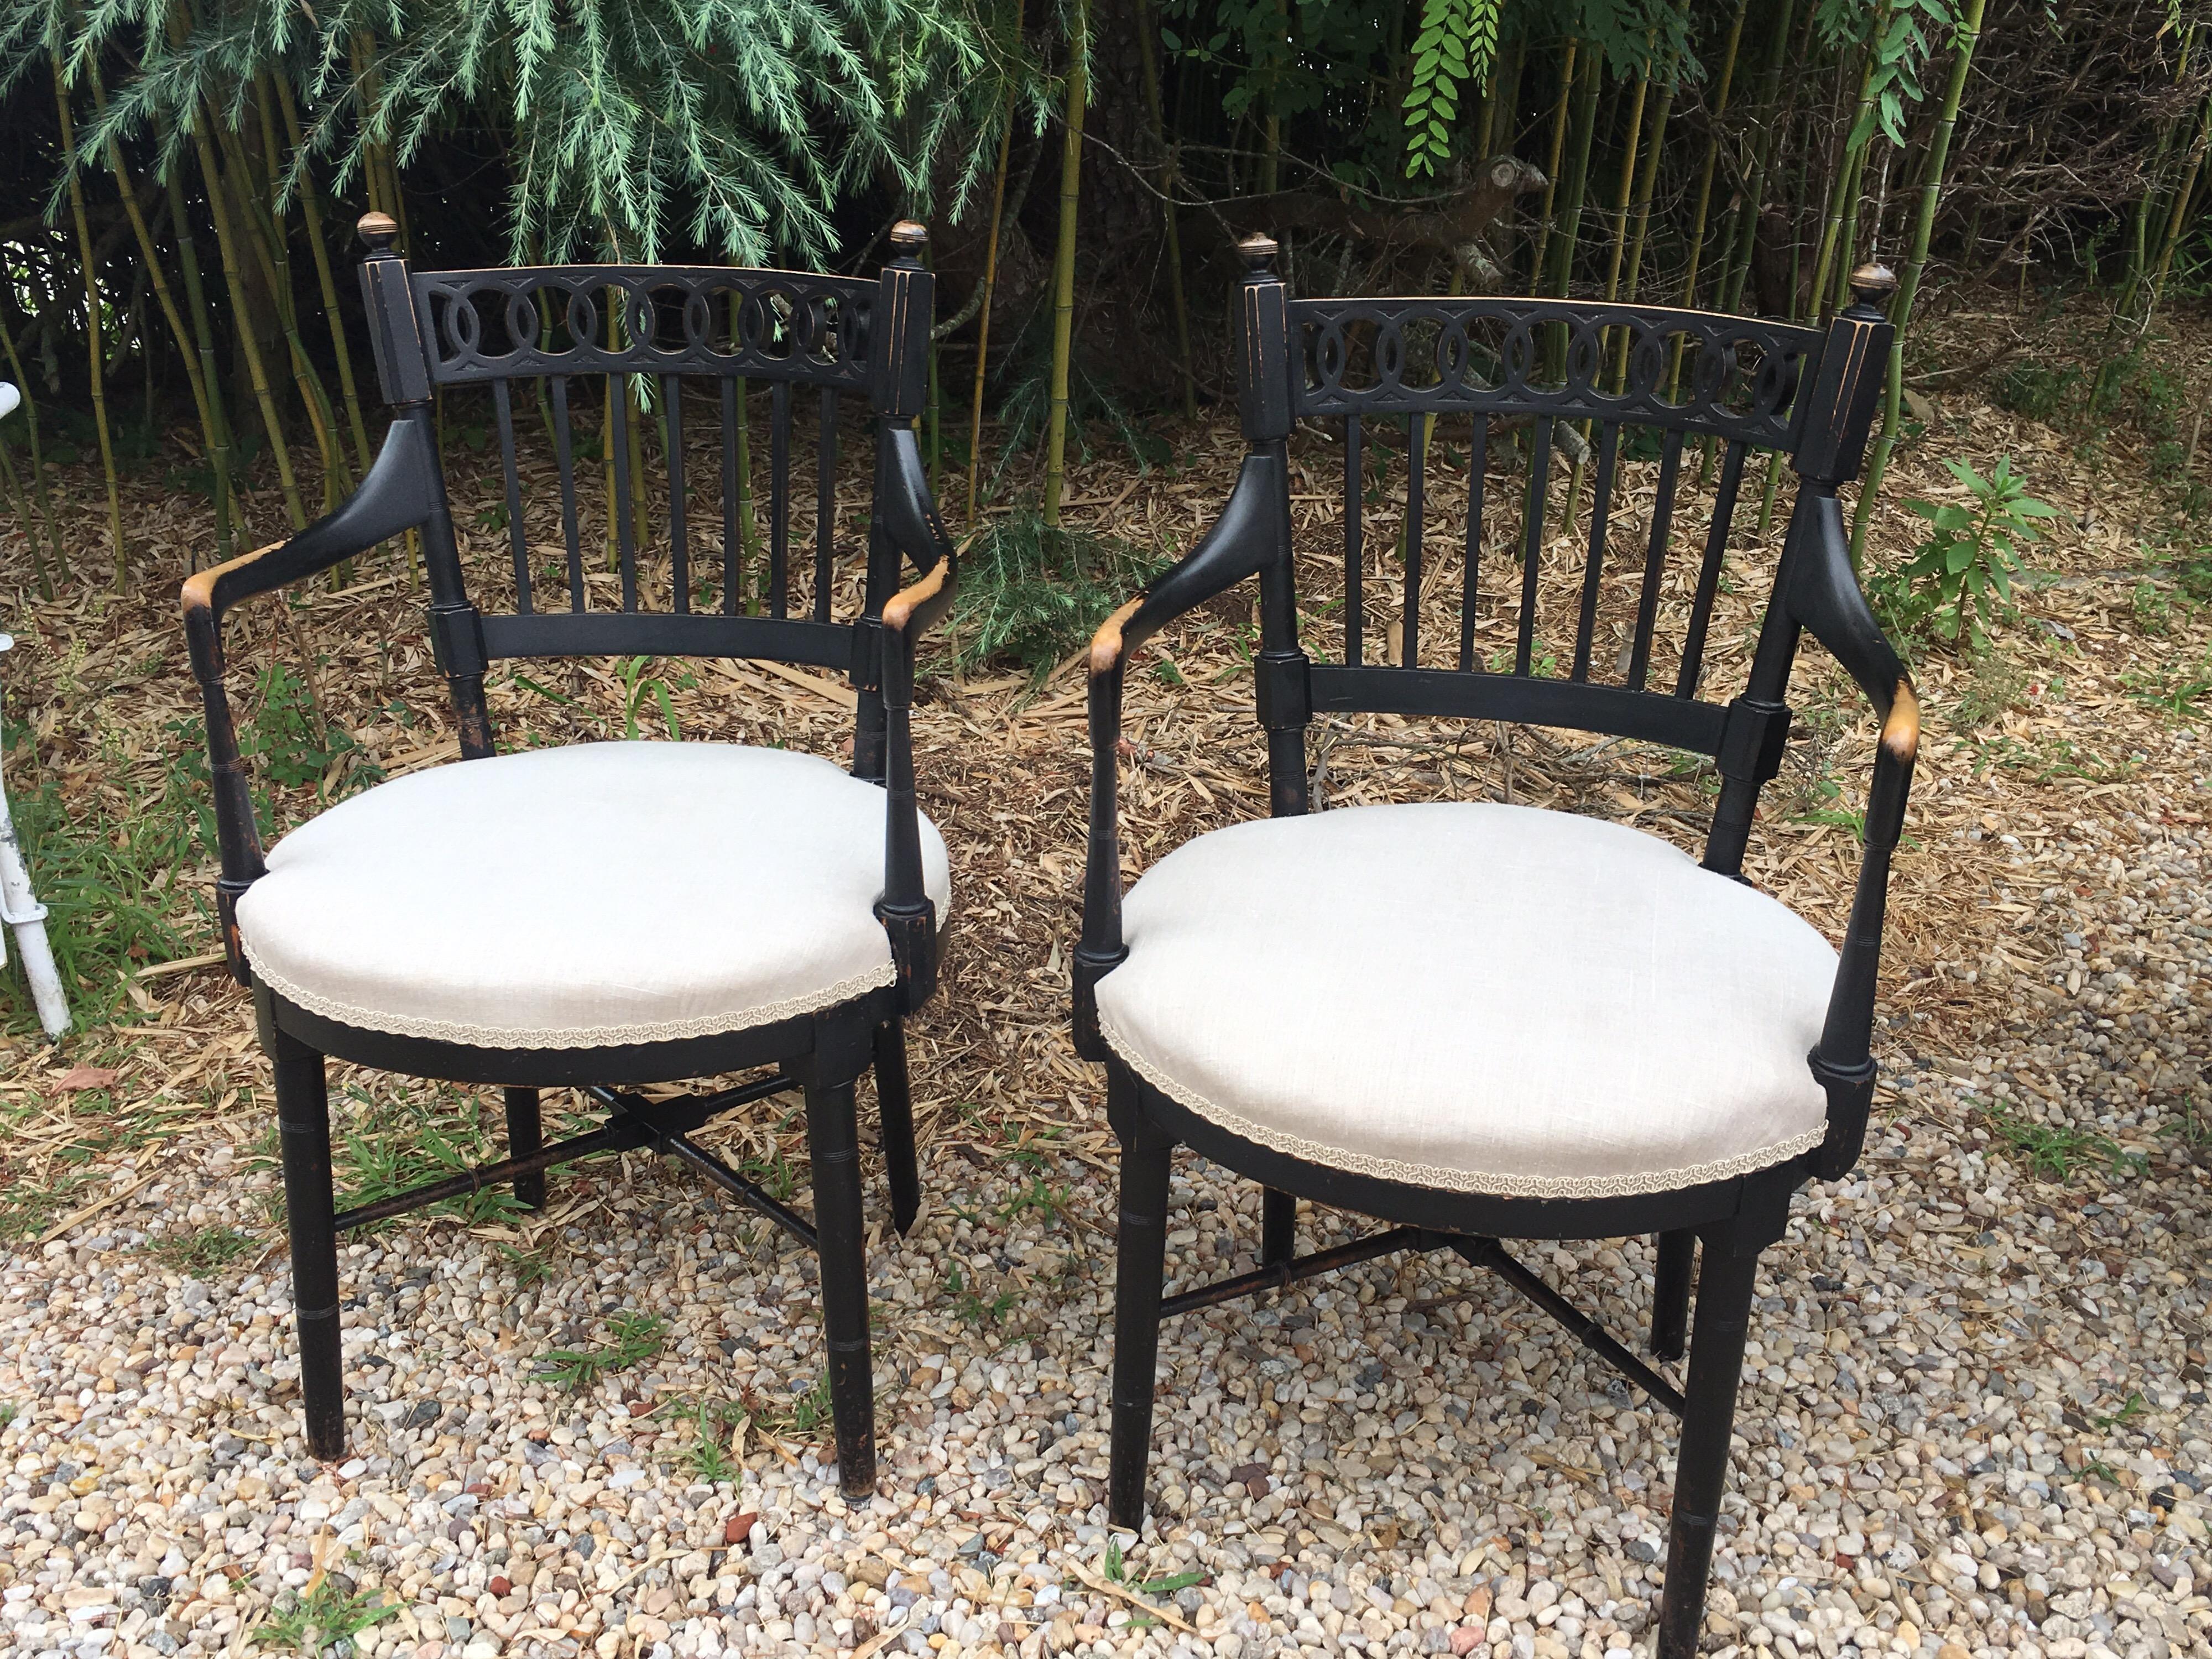 Vintage black painted armchairs, interlocking circle motif on the top rail, ball finials and upholstered in a lovely neutral linen with tape trim around.
Wear to finish, particularly at arms and legs.